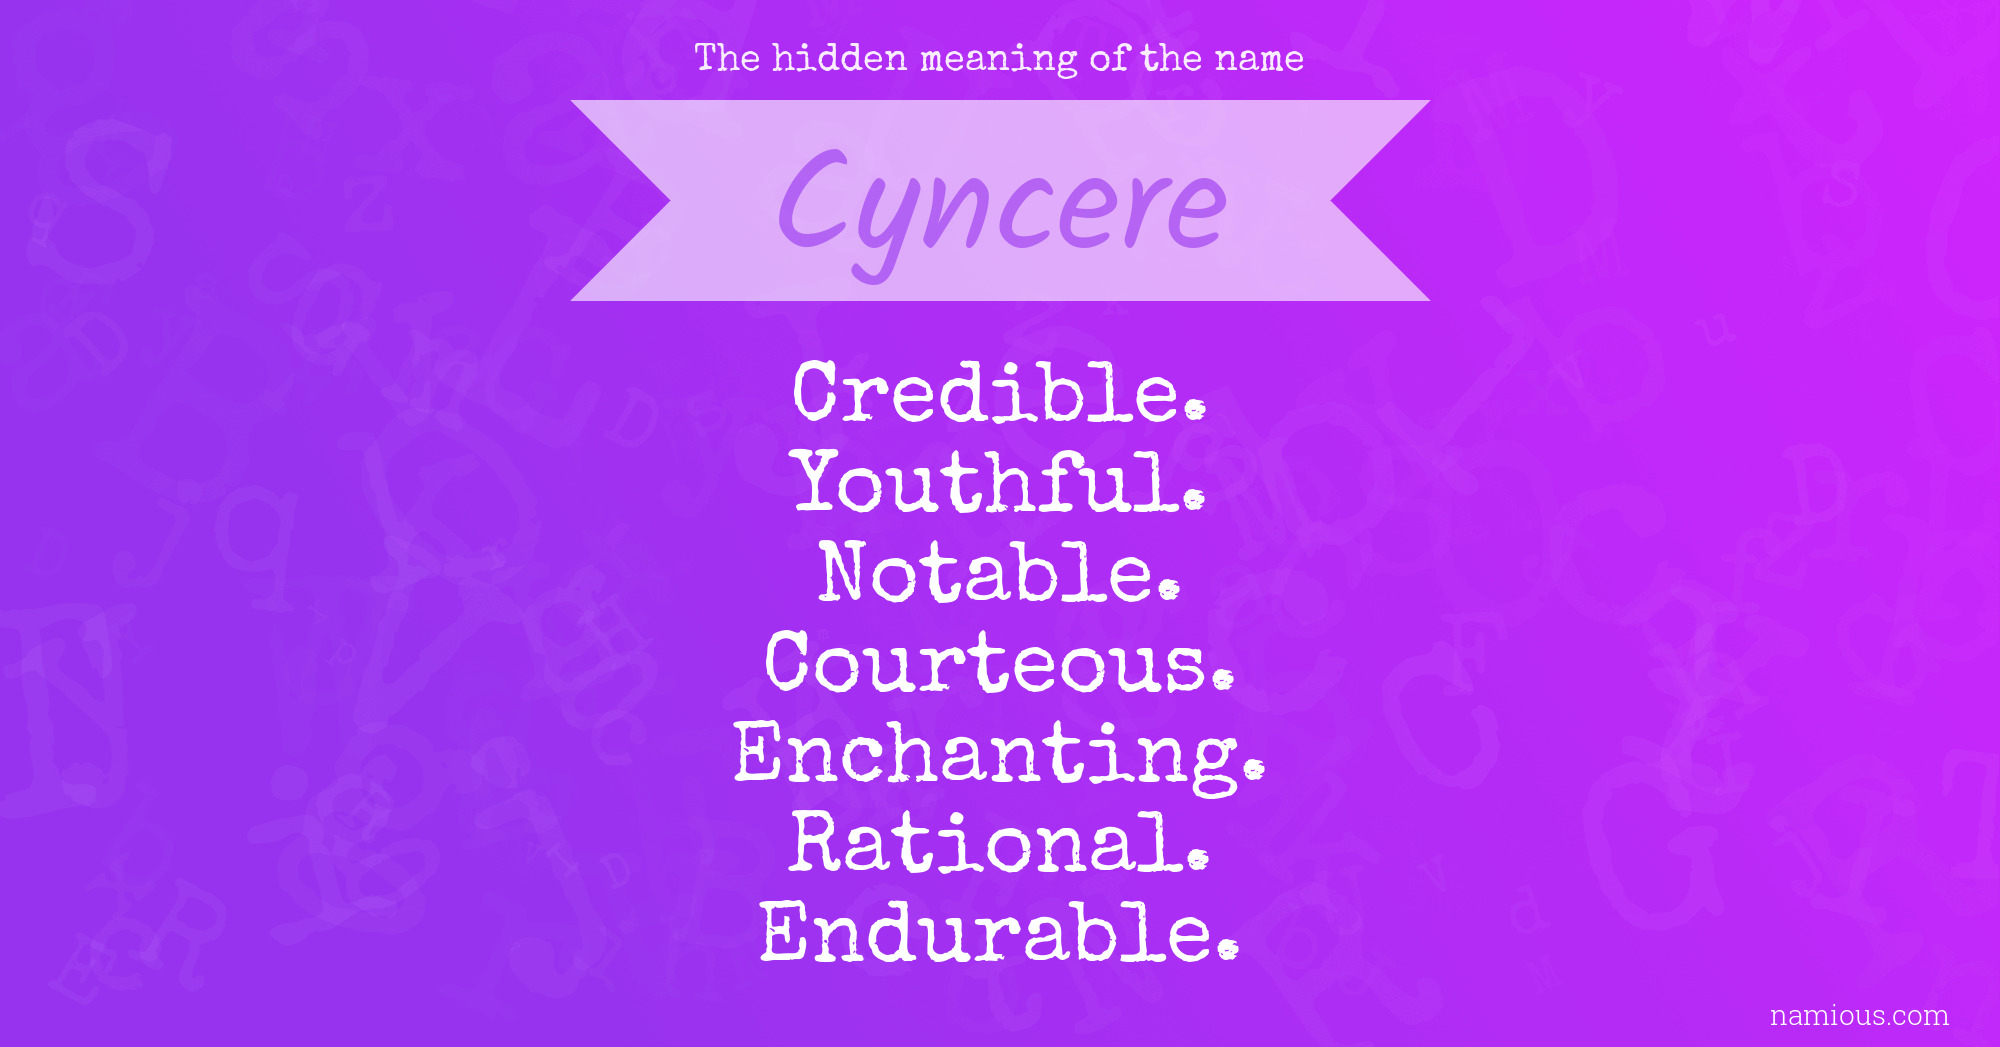 The hidden meaning of the name Cyncere